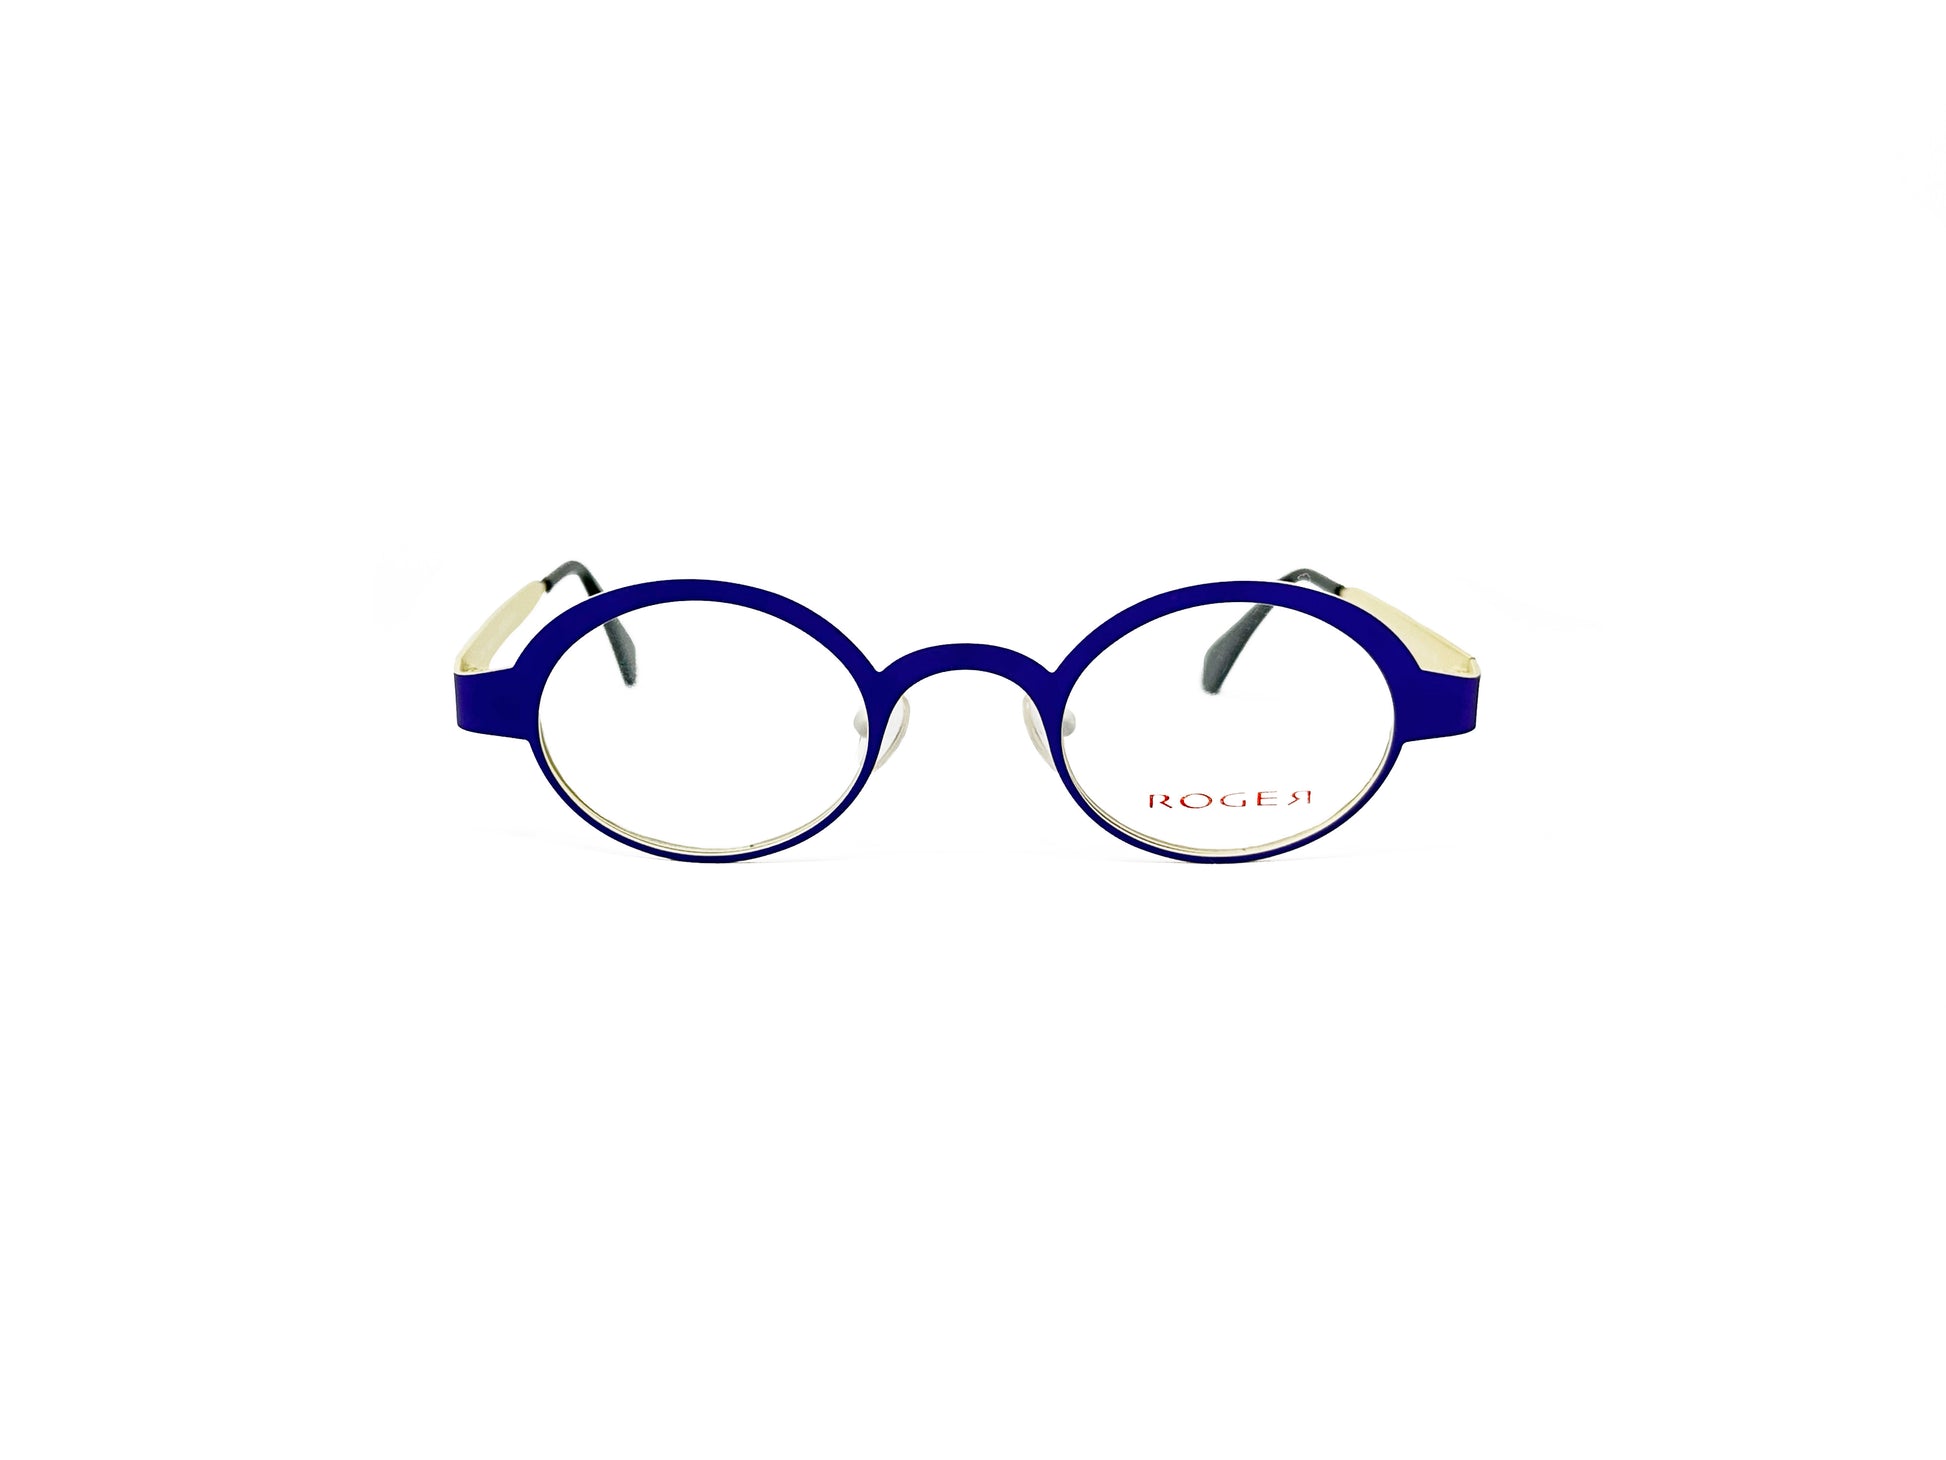 Roger oval, metal optical frame. Model: Dee. Color: 6 - Blue with cream insides. Front view. 